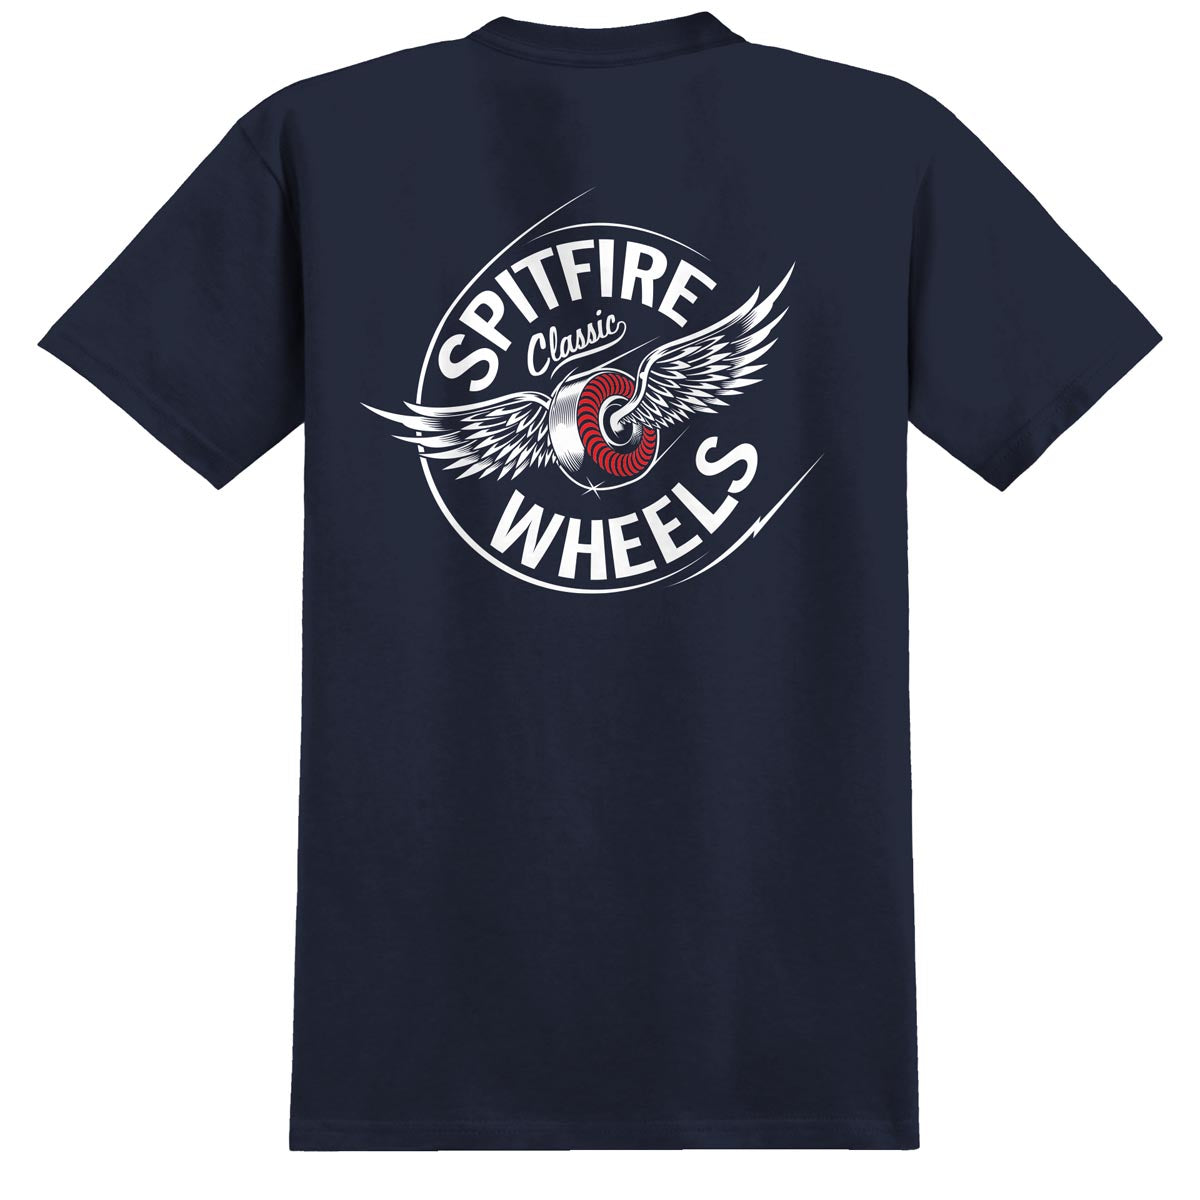 Spitfire Youth Flying Classic T-Shirt - Navy/White/Red image 1